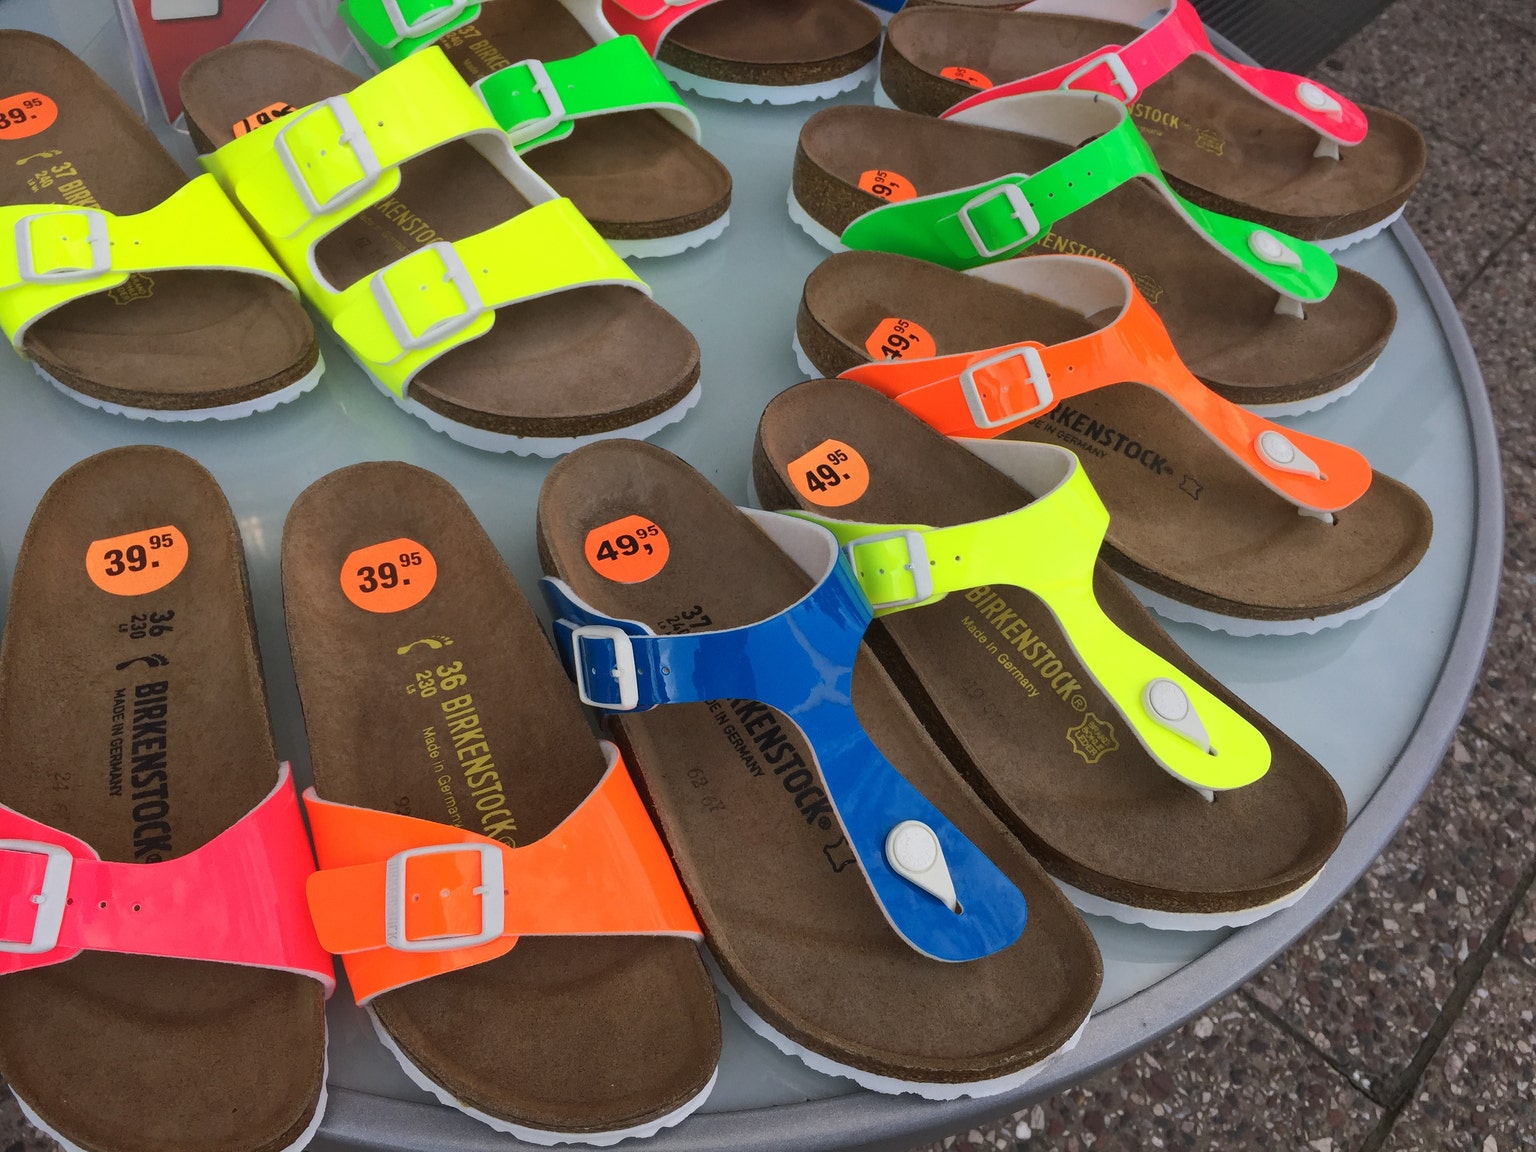 Birkenstock sandals and clogs brand could IPO, backed by LVMH PE firm